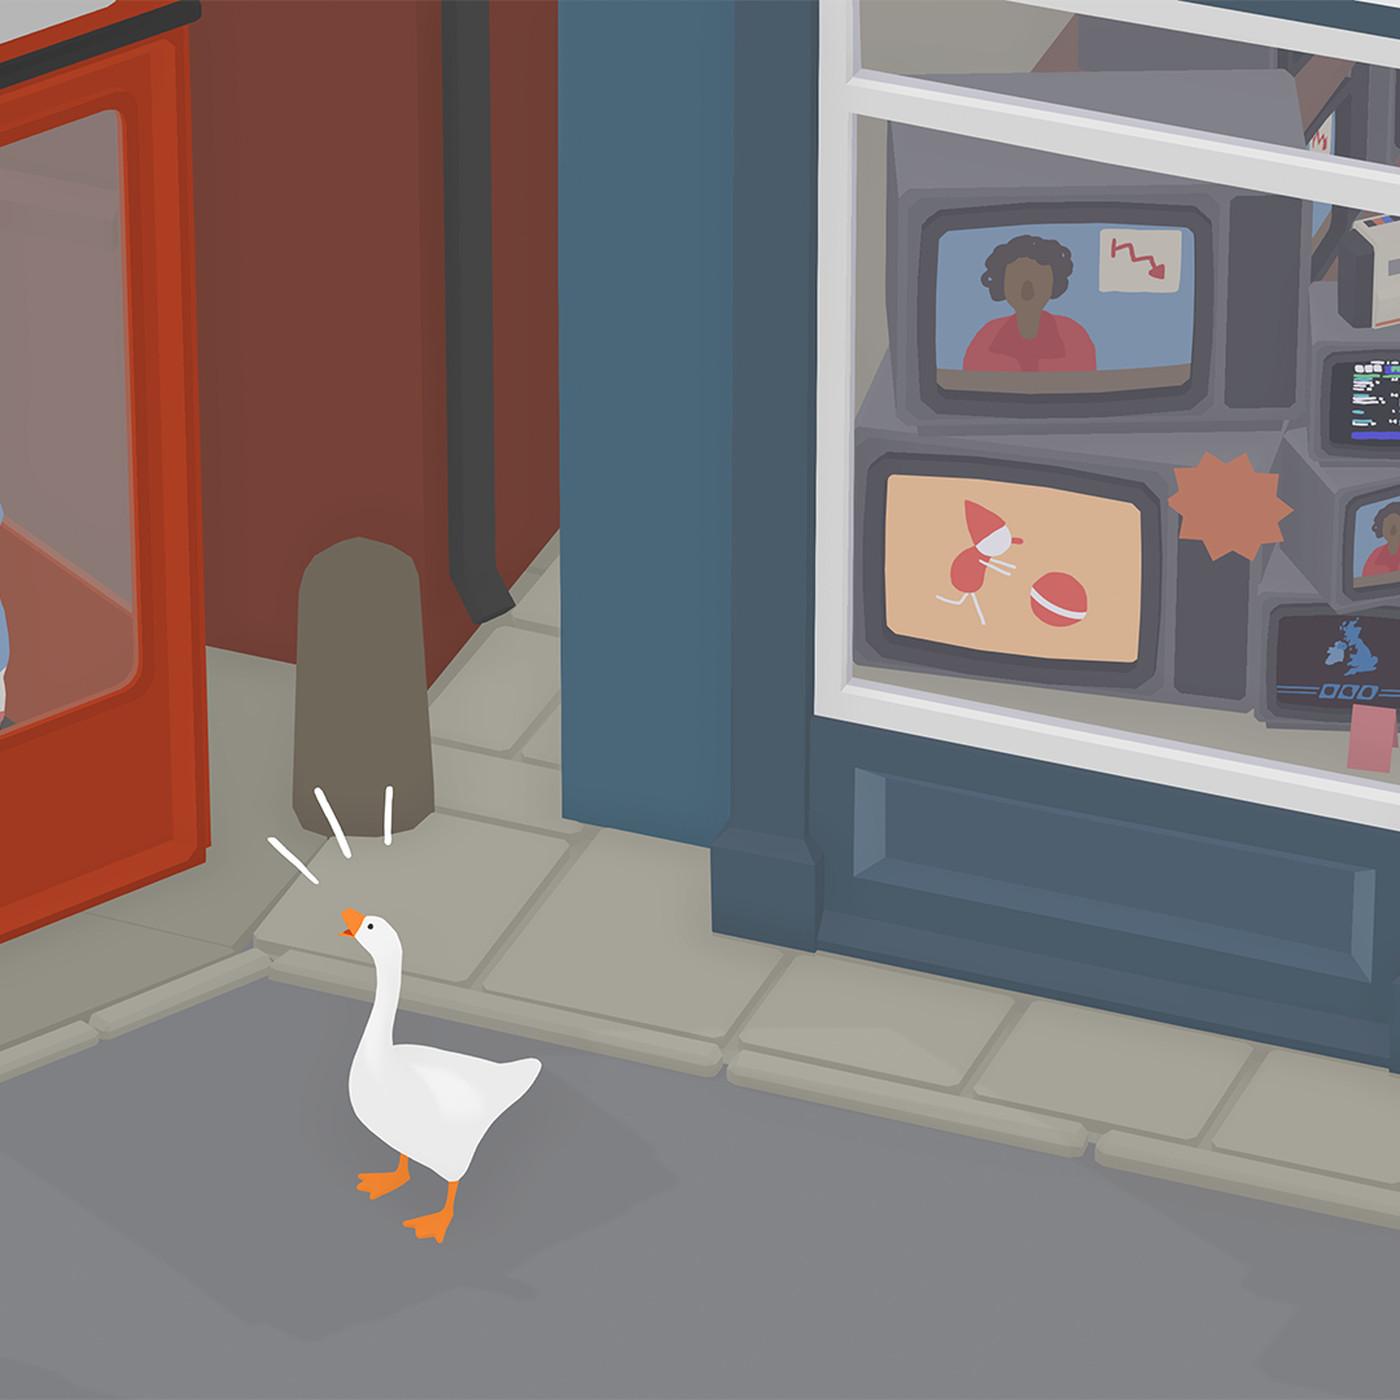 How Untitled Goose Game adapted Debussy for its dynamic. Goose Game Phone Wallpaper